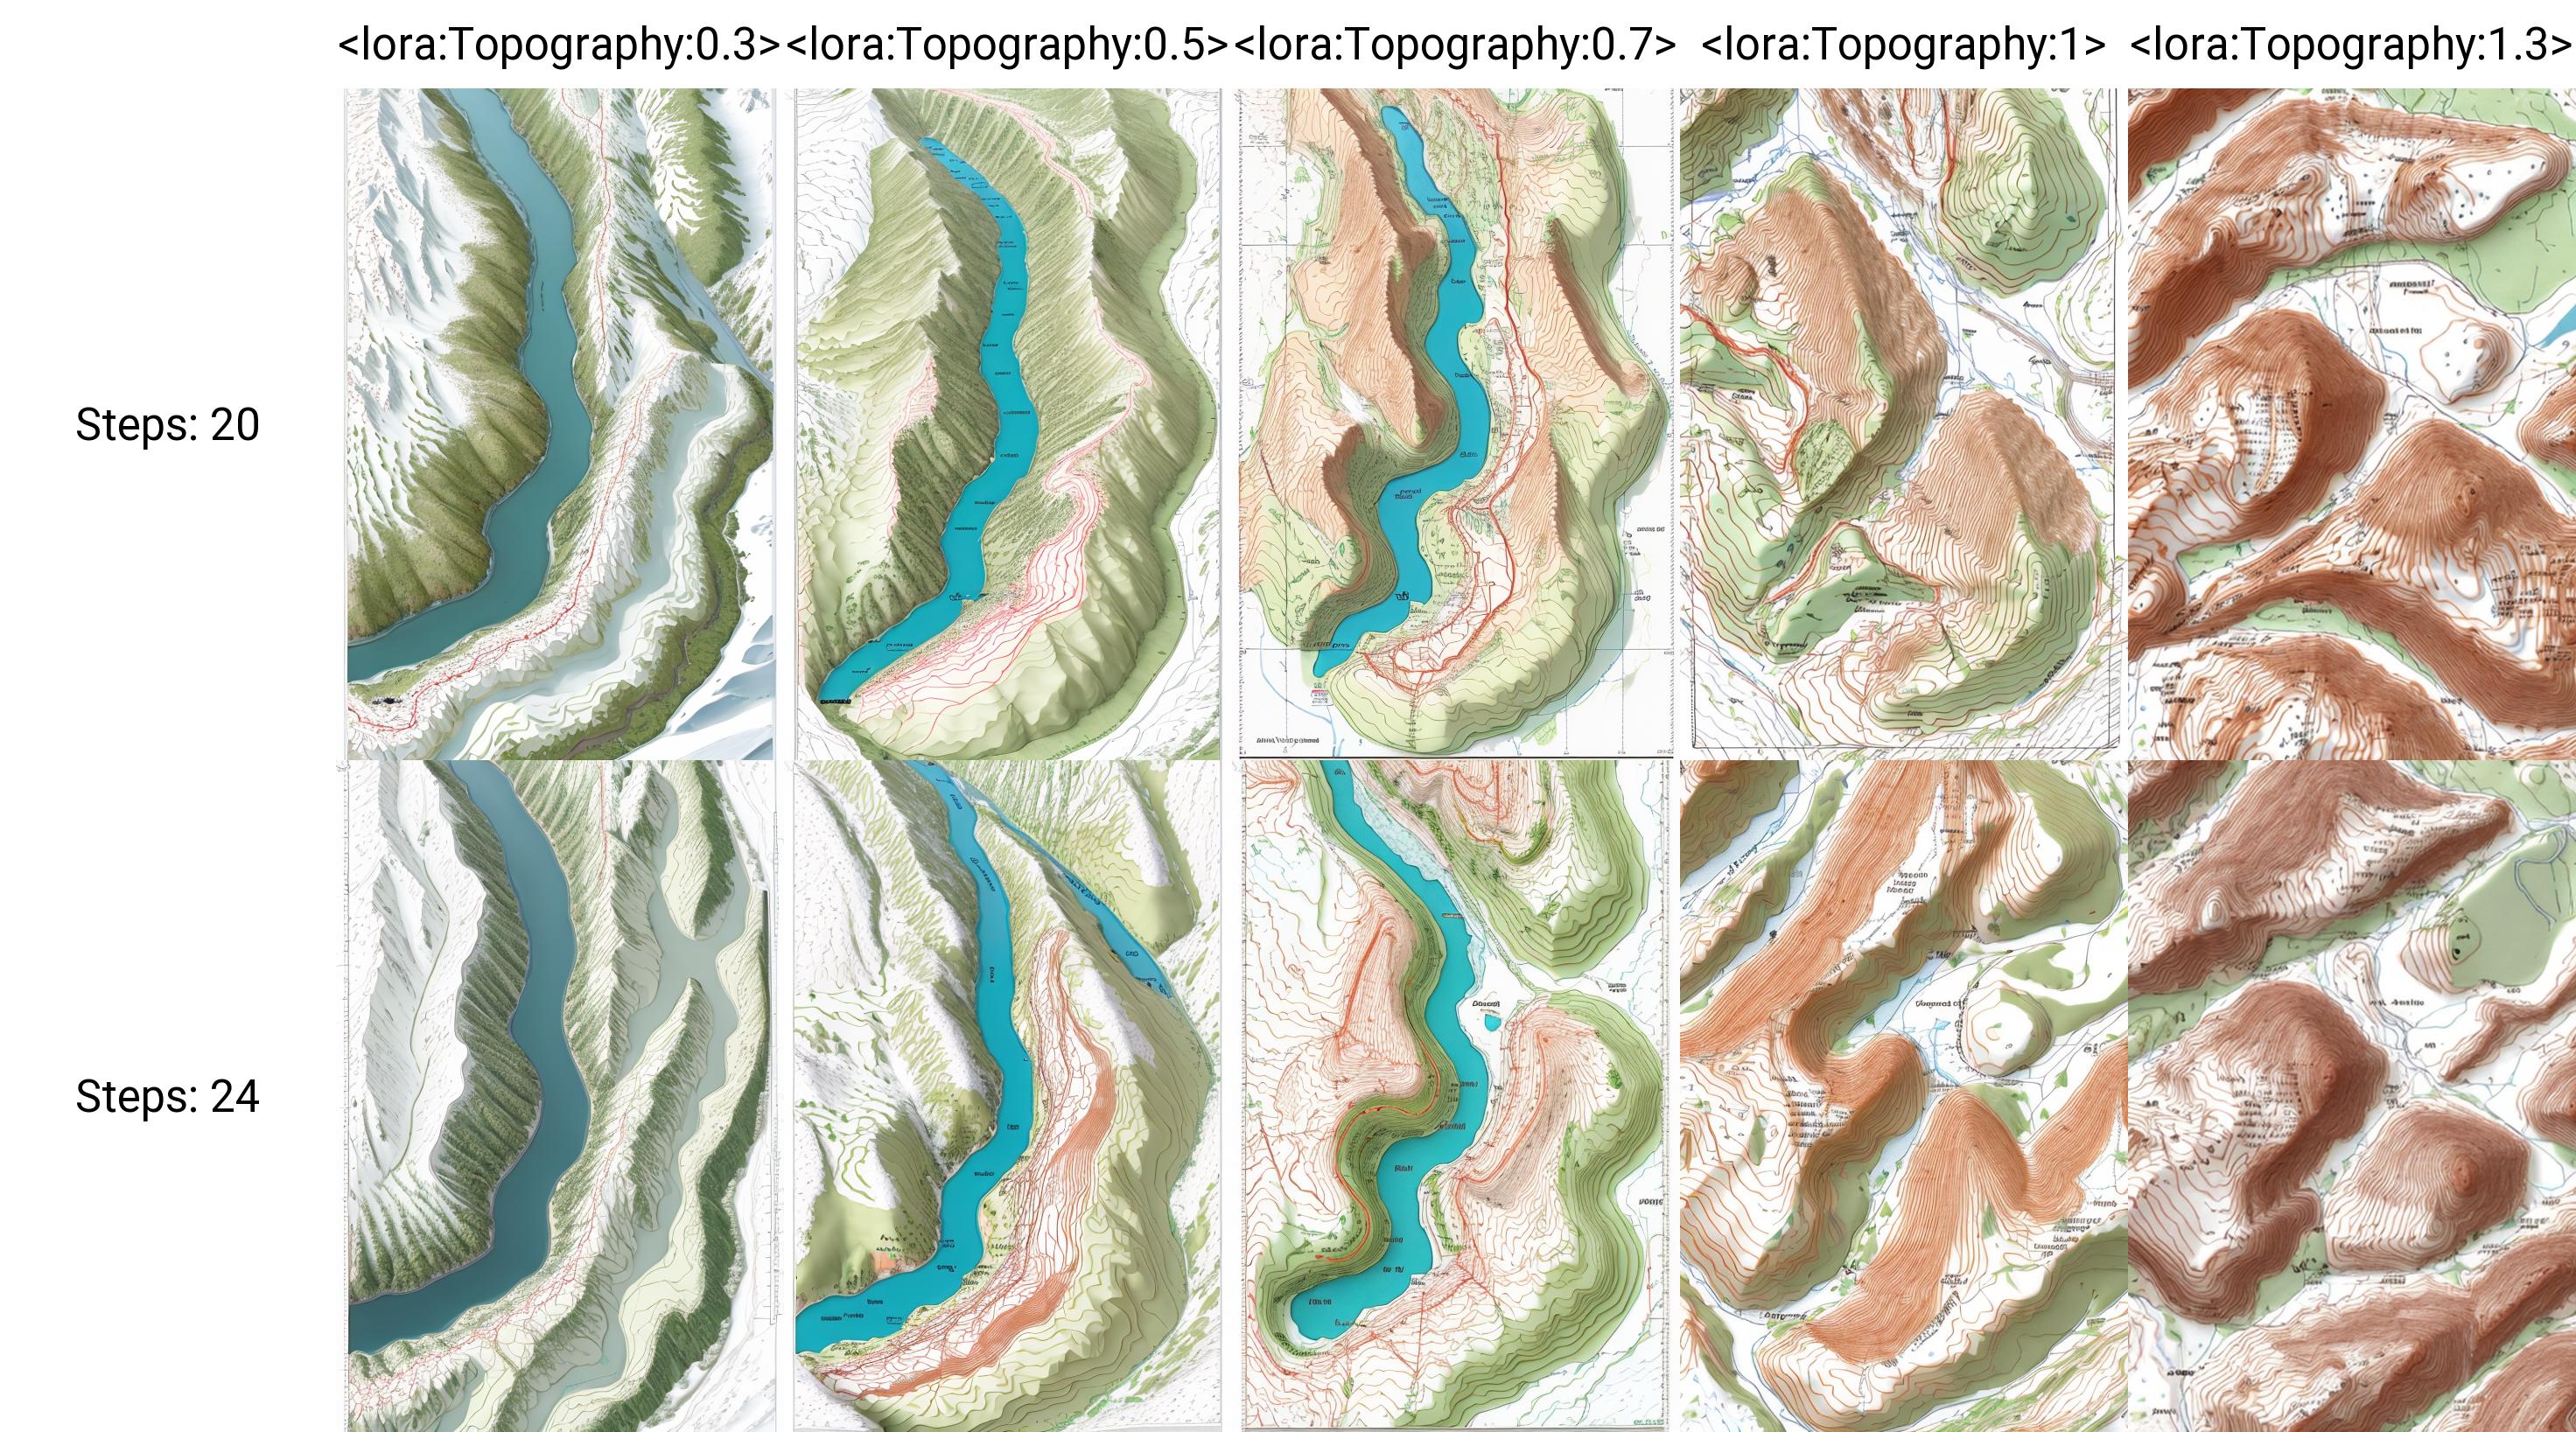 Topography maps image by Bohdan